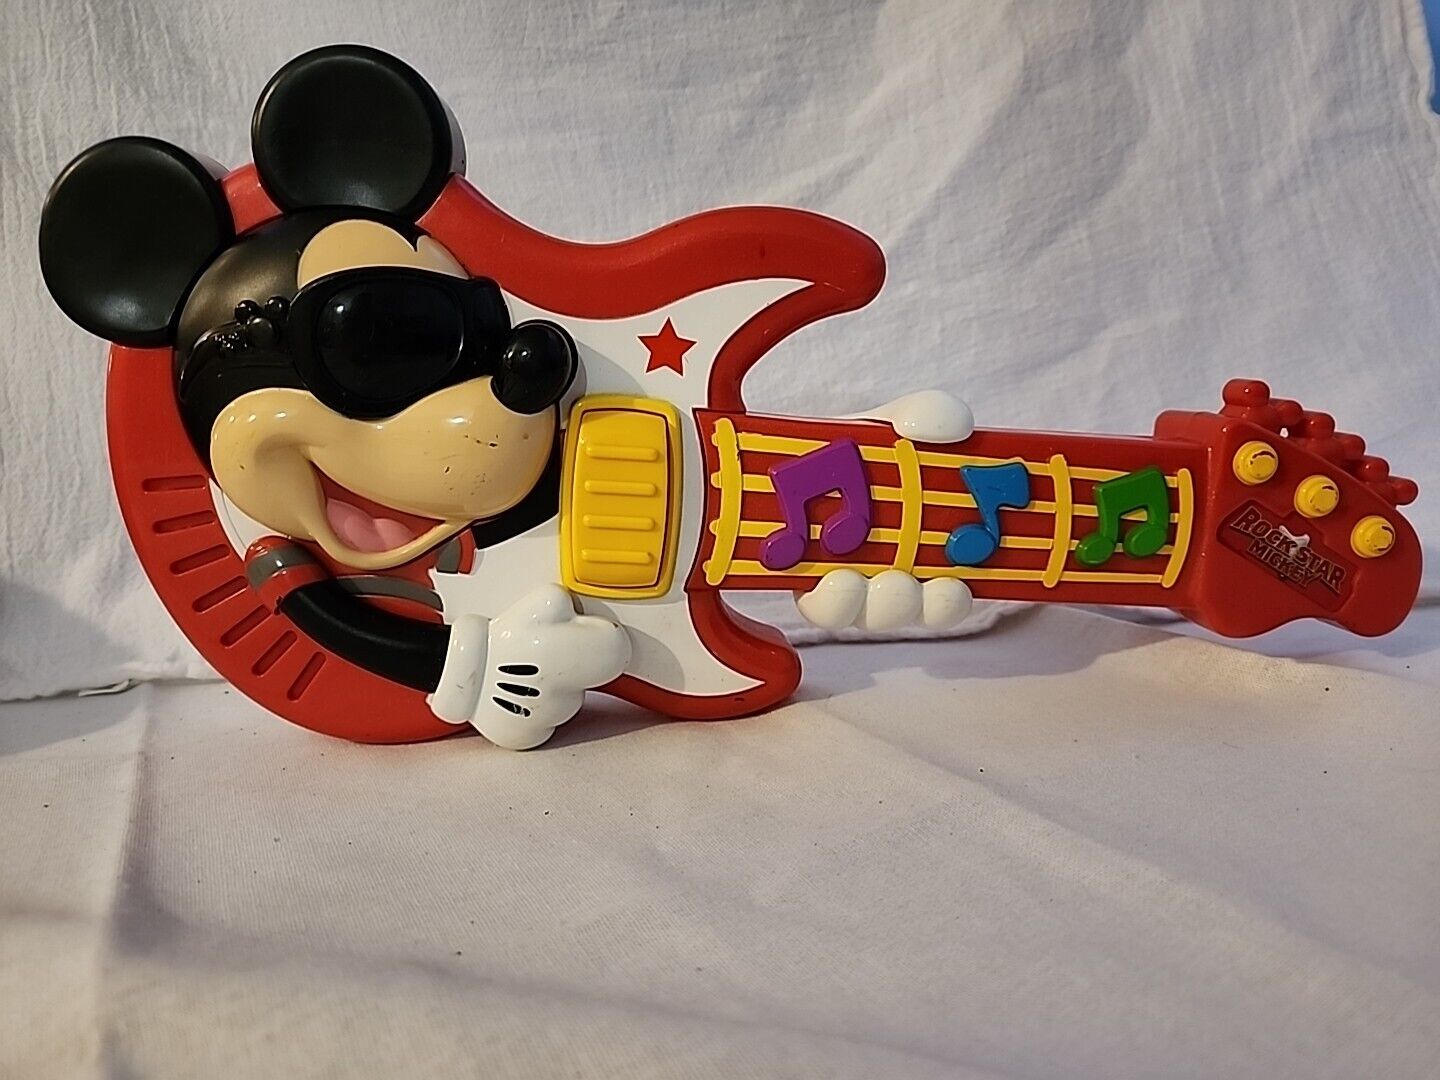 Disney Rock Star Mickey Mouse Musical Guitar - Collectible Tested Works